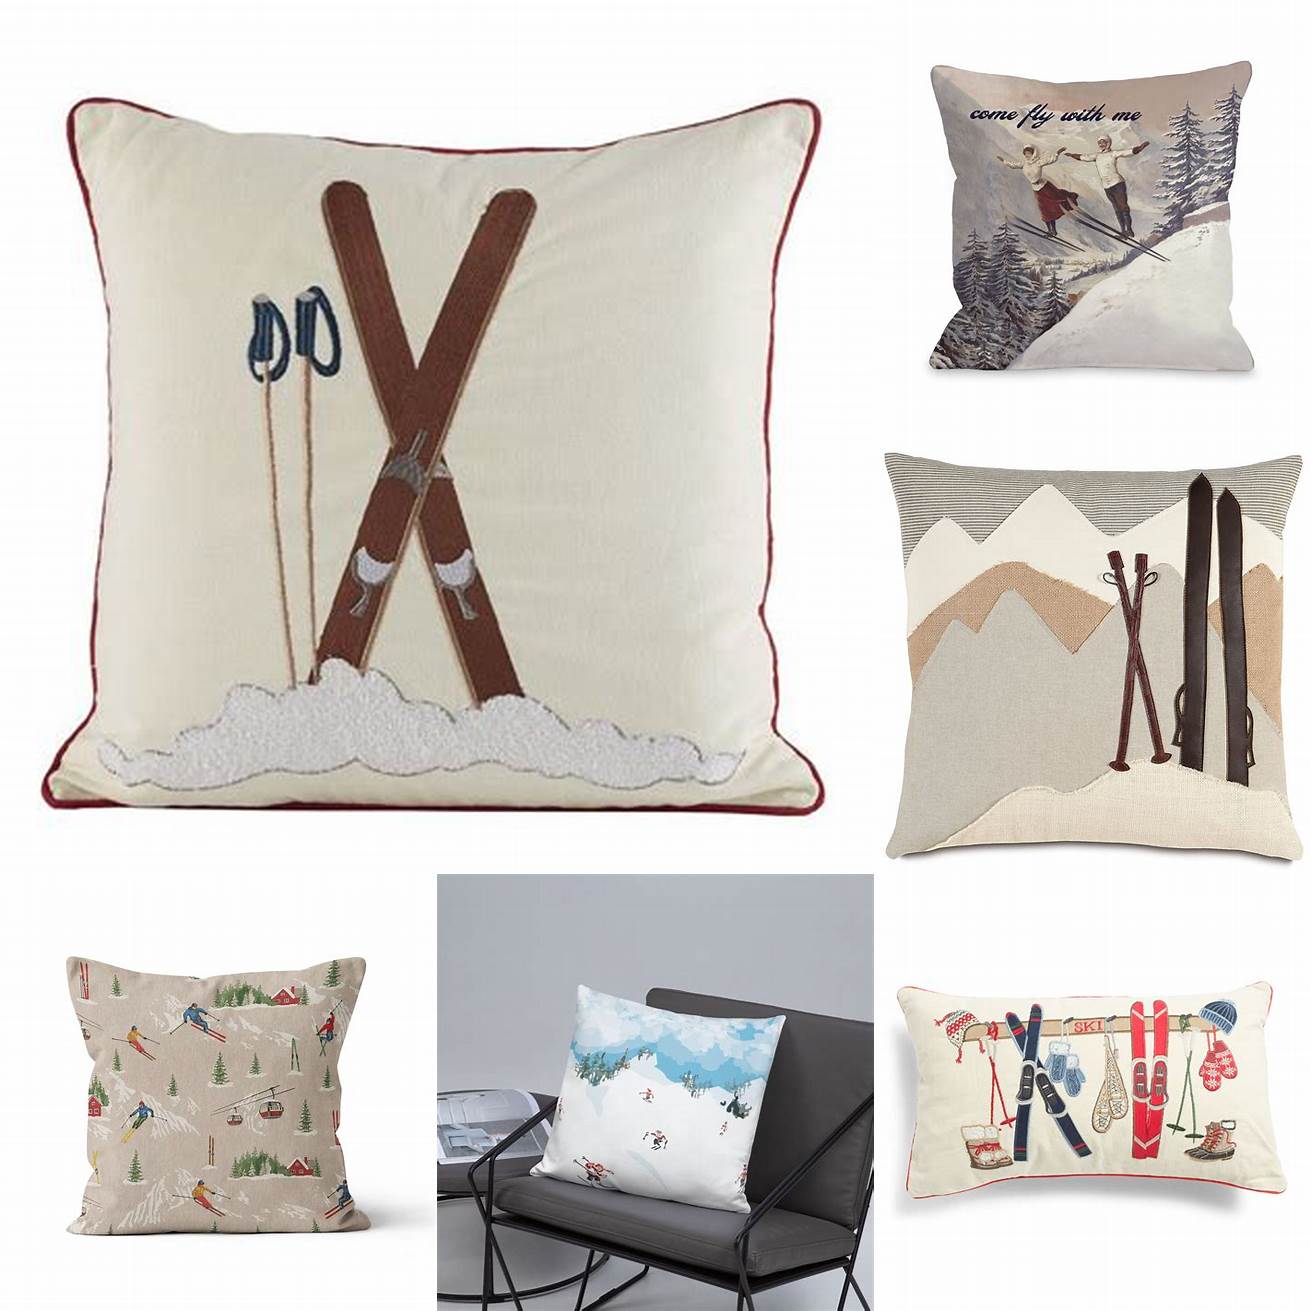 2 Ski-Themed Pillows and Blankets